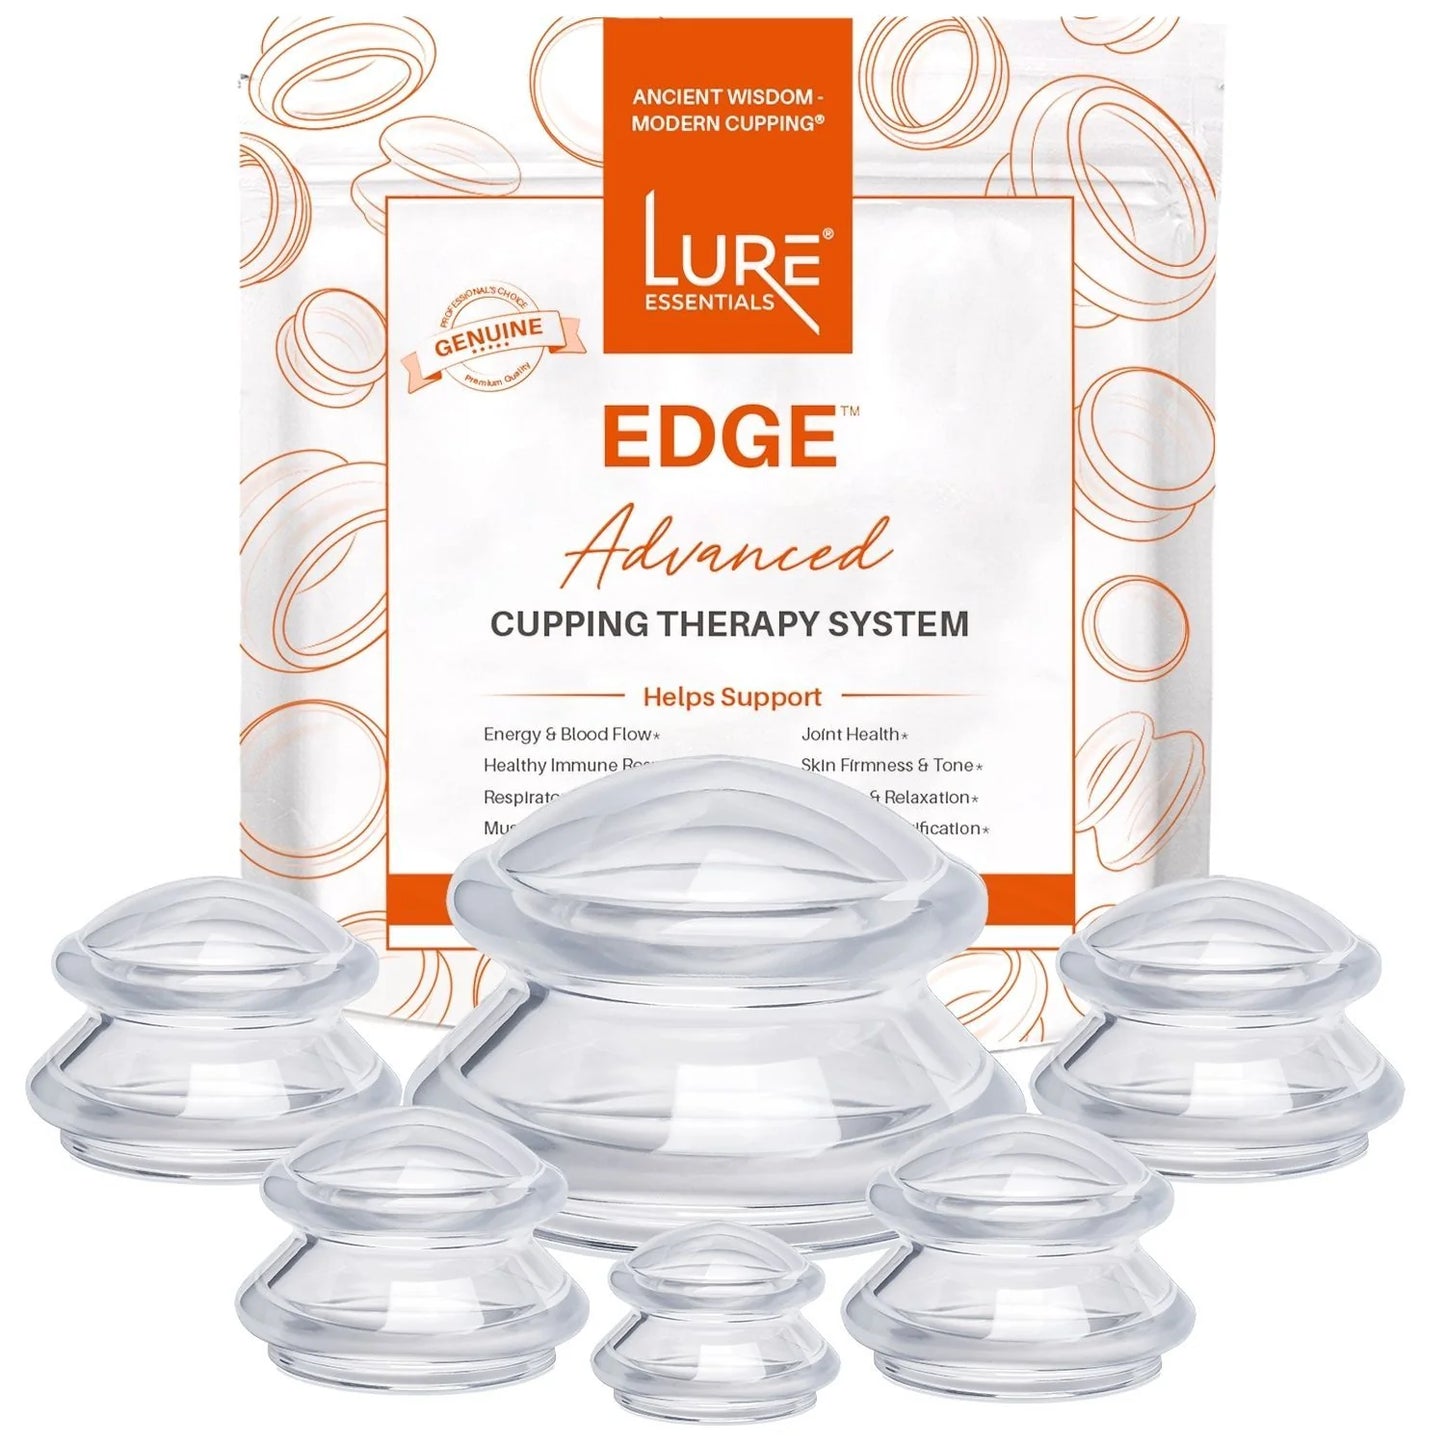 Edge Advanced Body Cupping System